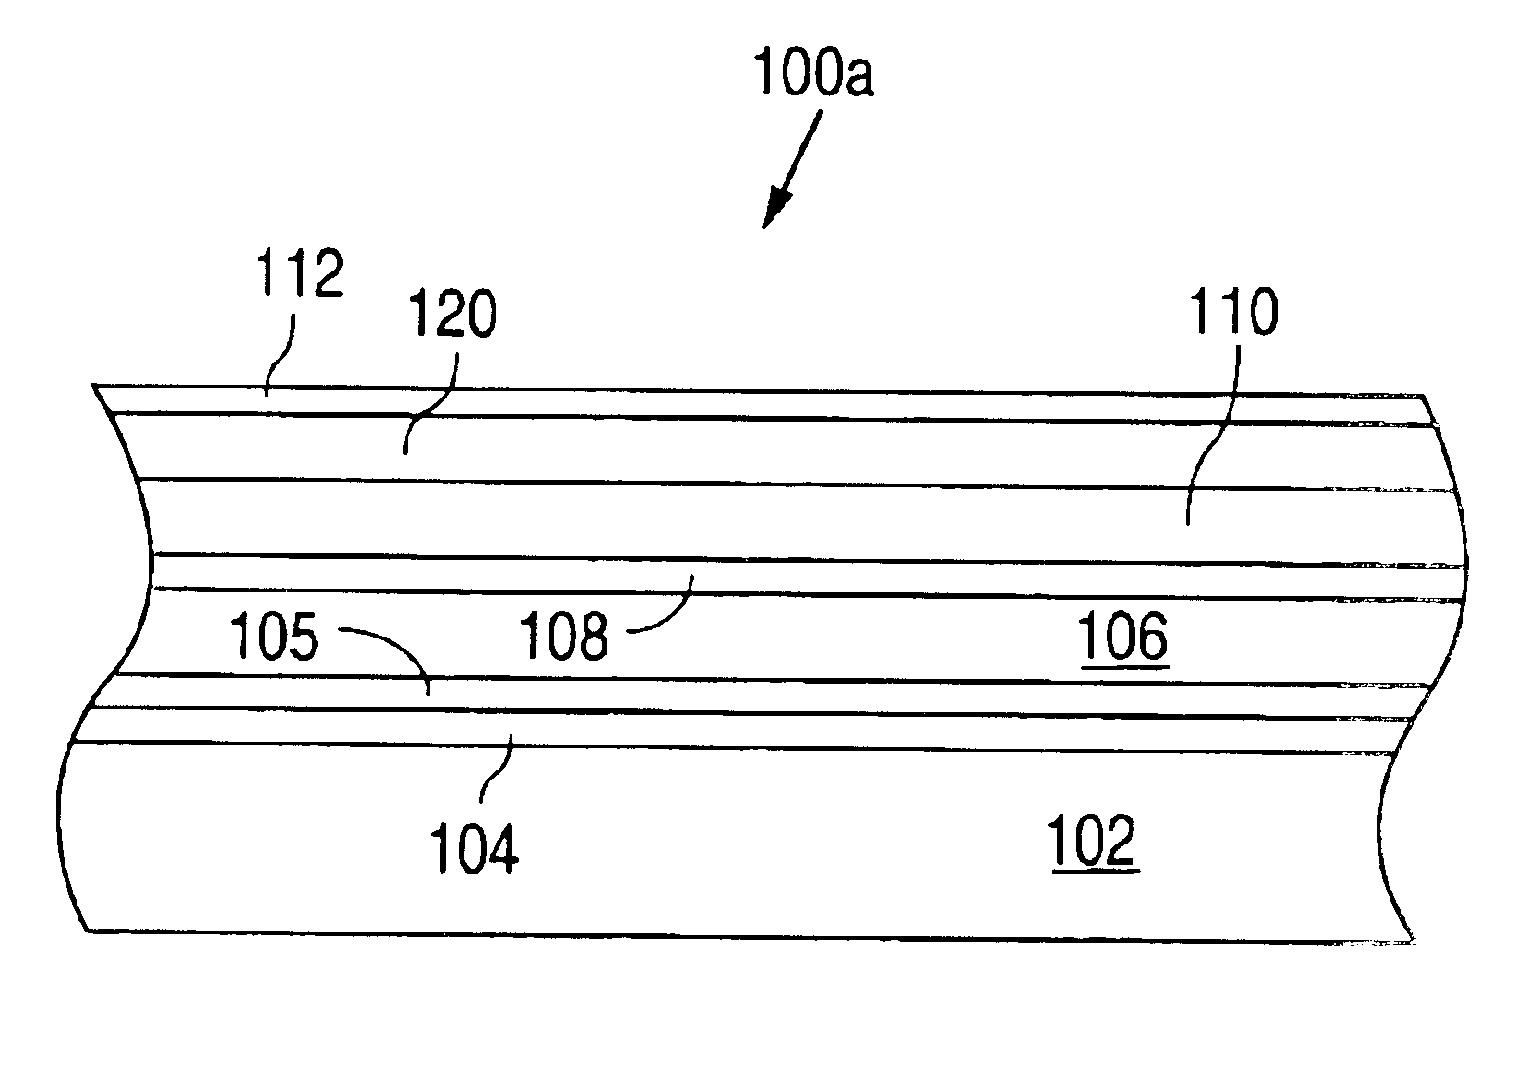 Magnetic media with improved exchange coupling